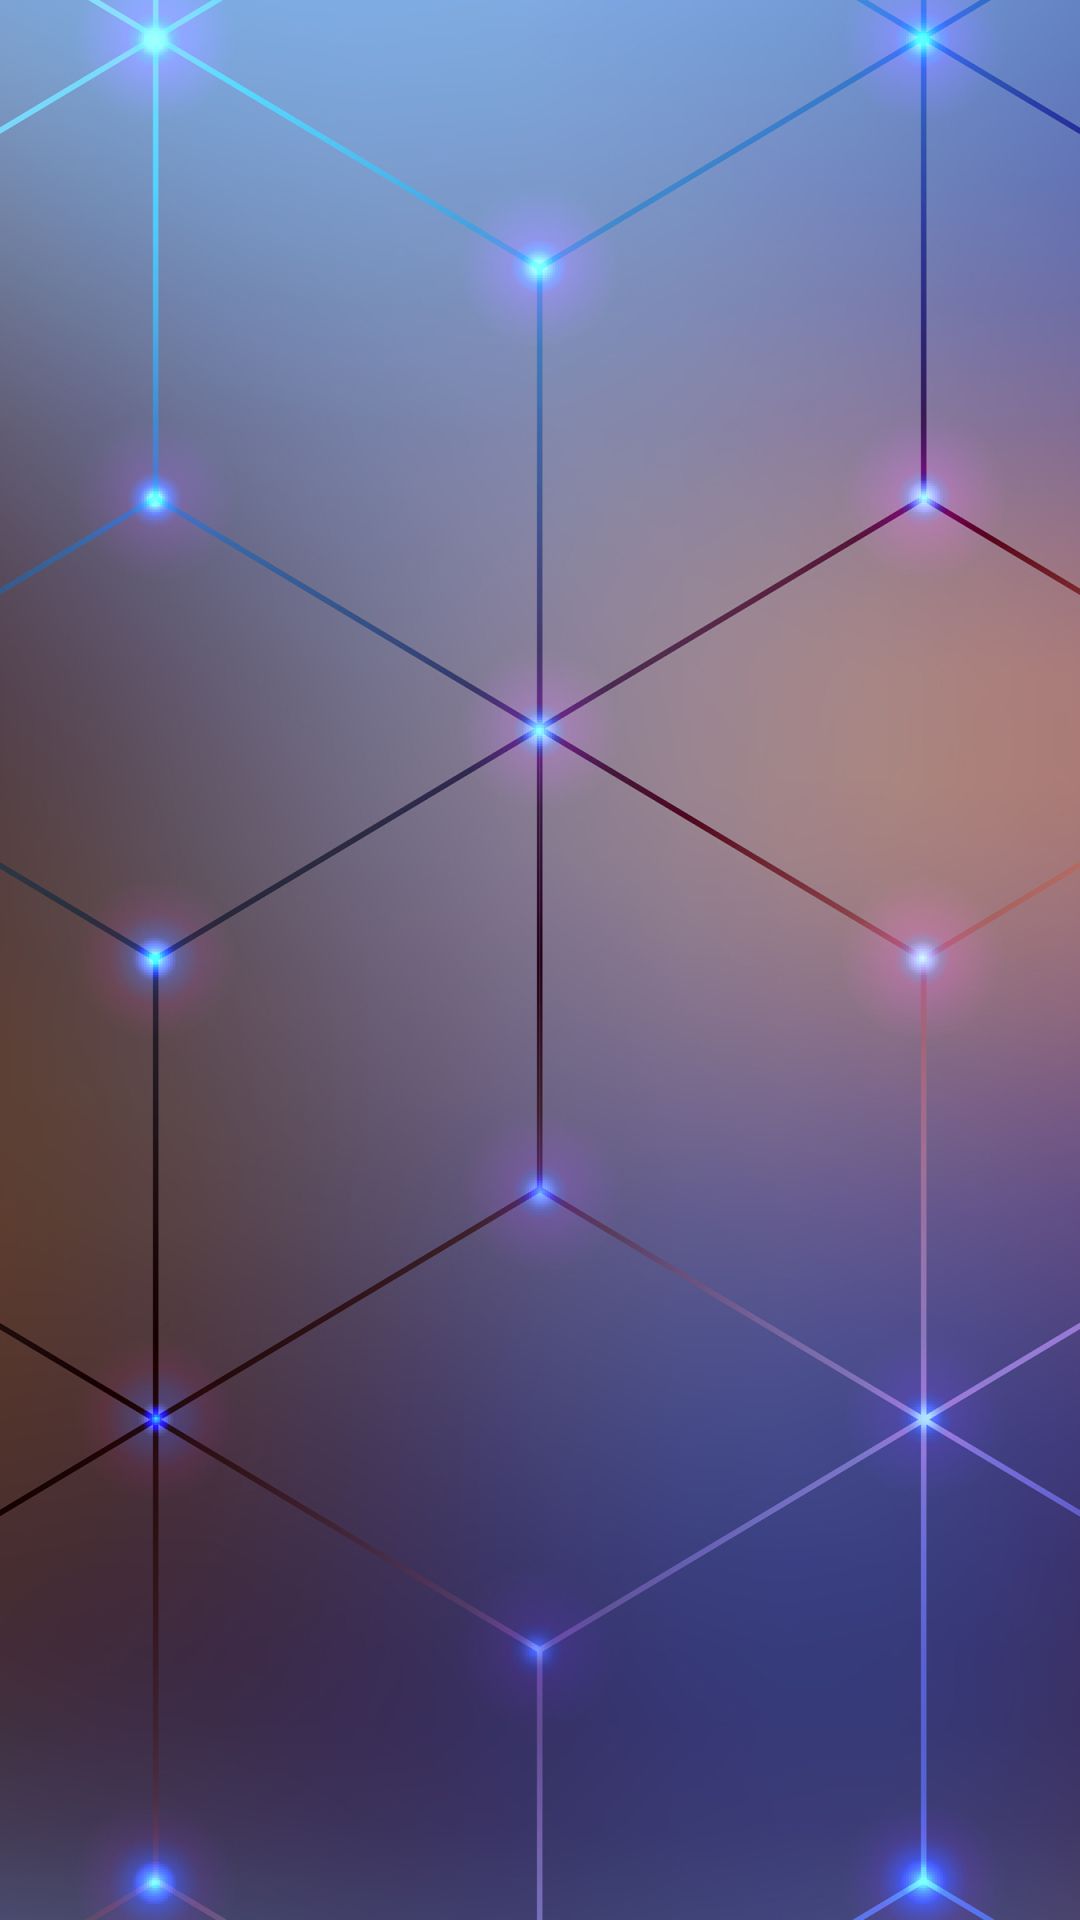 Download This Wallpaper IPhone 6 Geometry (1080x1920) For All Your Pho. Geometric Wallpaper Iphone, Mobile Wallpaper Android, Abstract Iphone Wallpaper